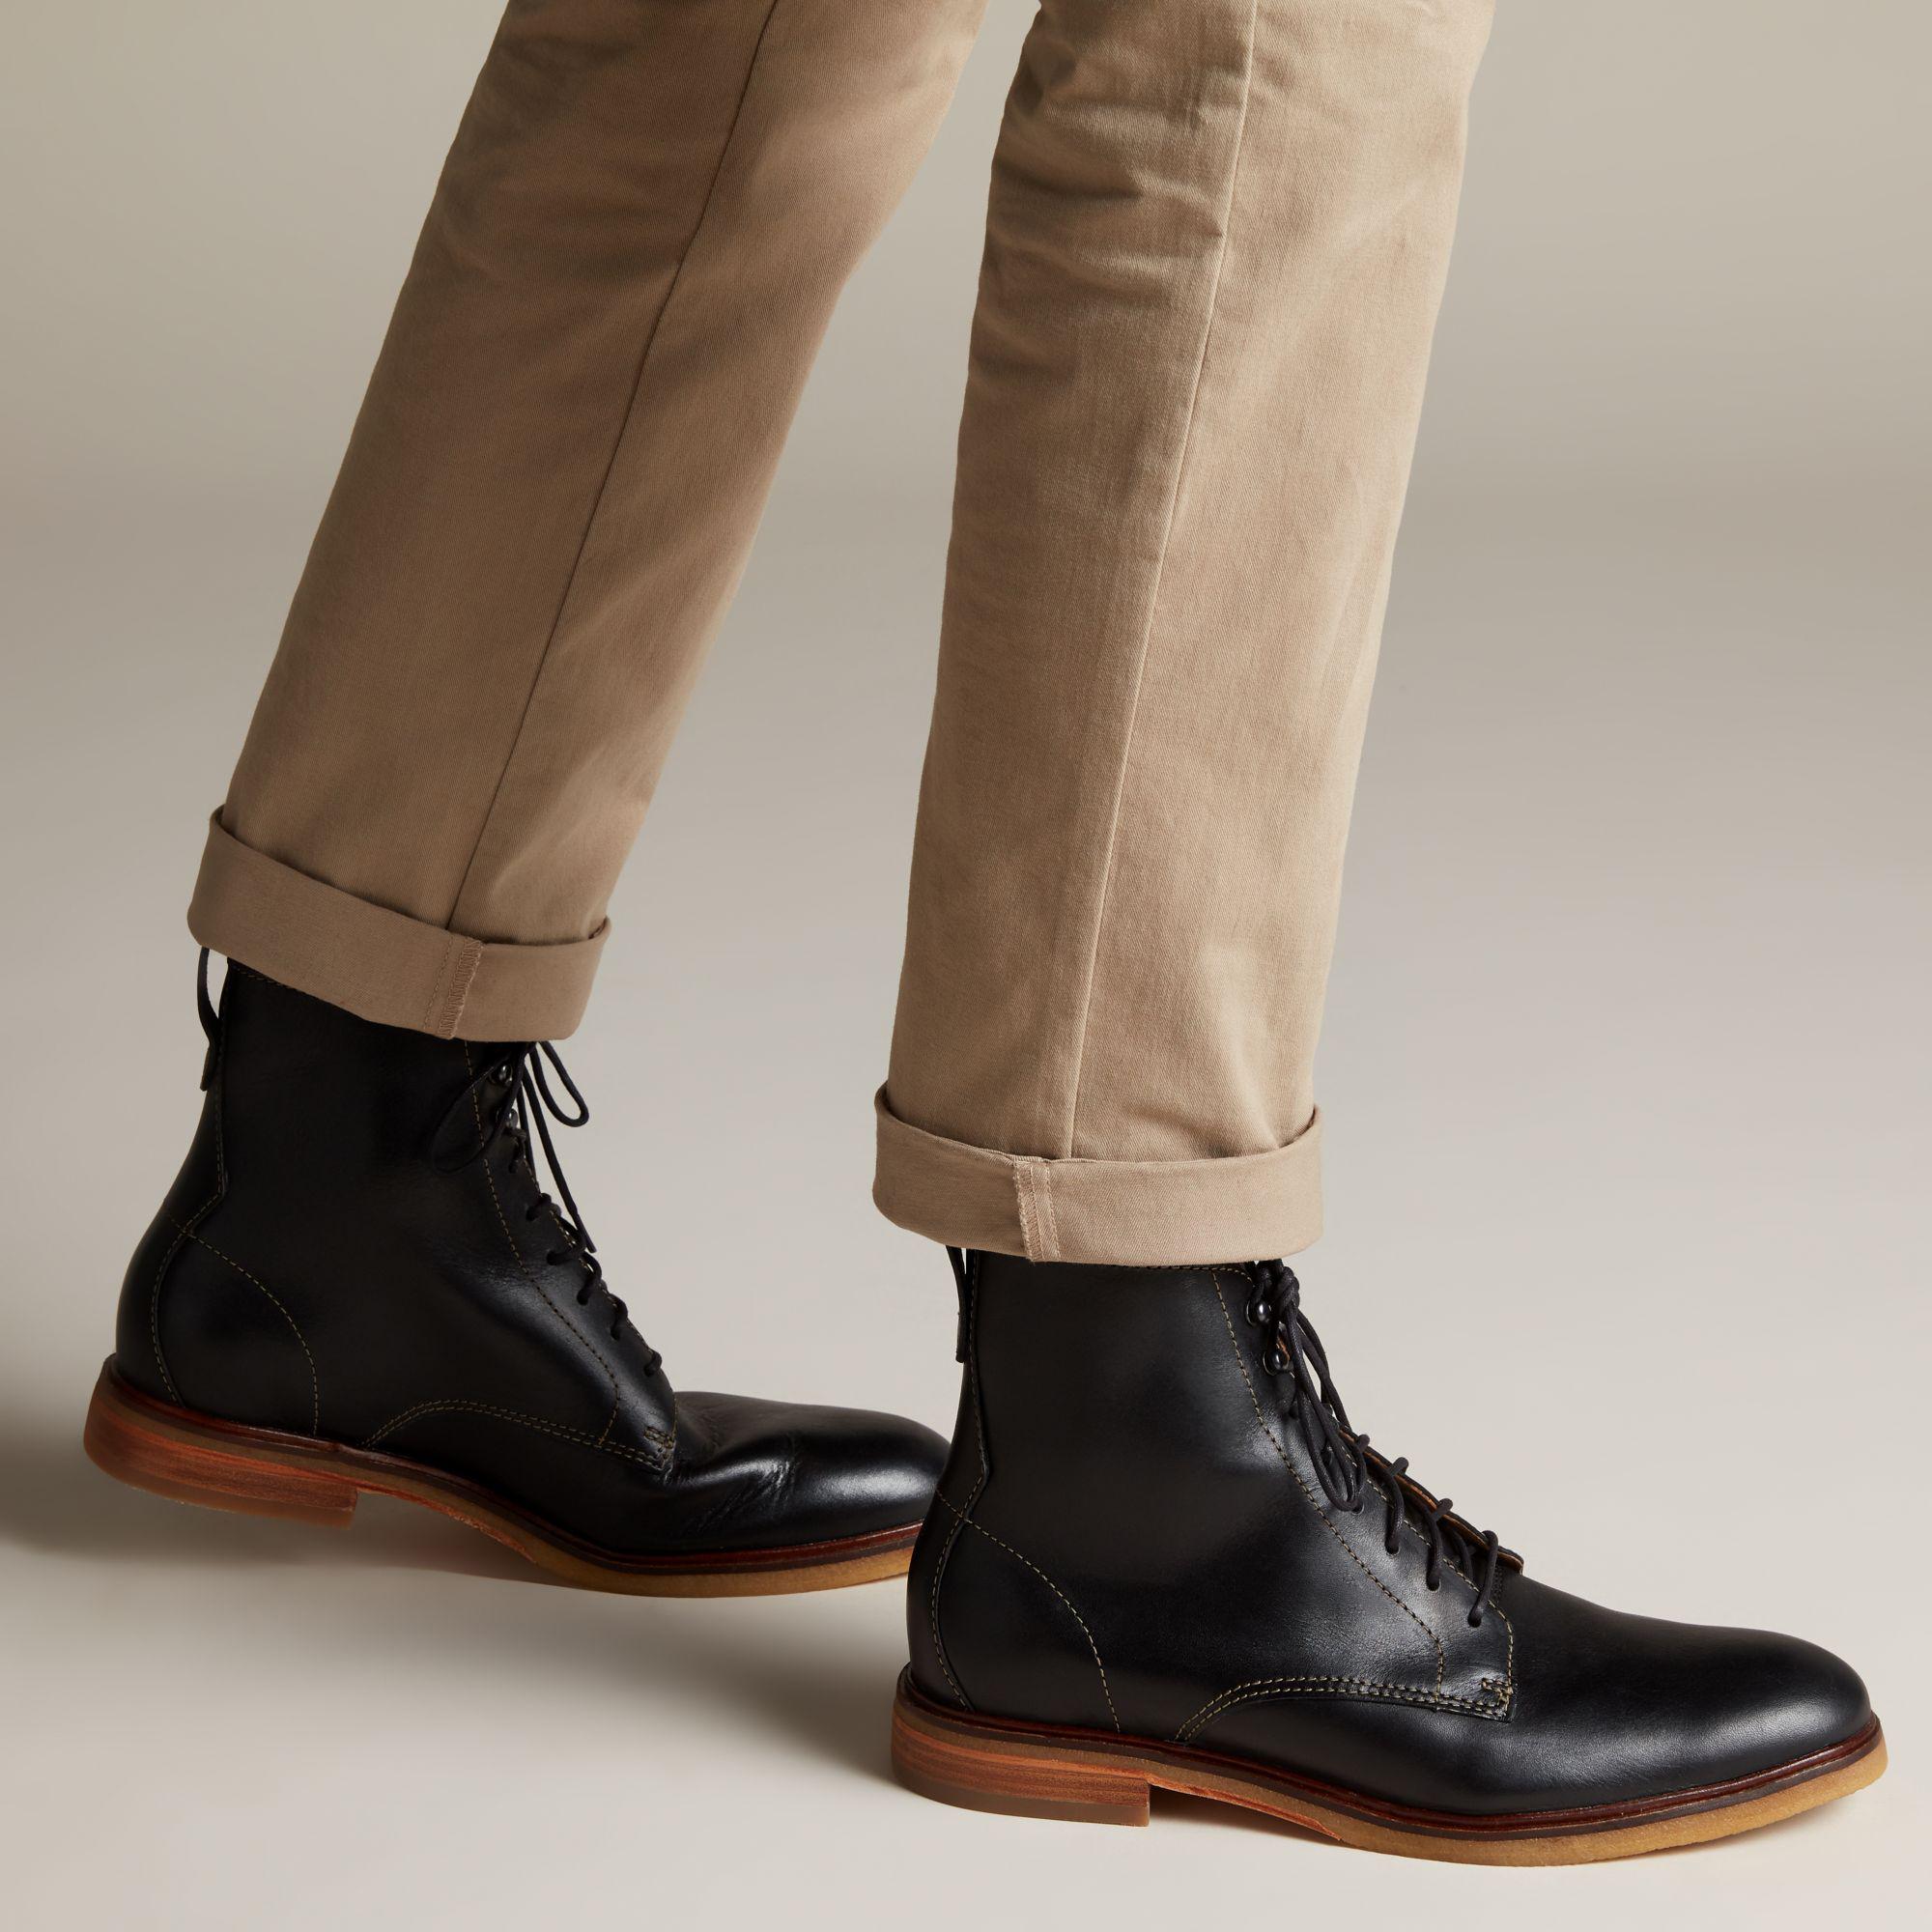 clarkdale rich boots off 66% - online 